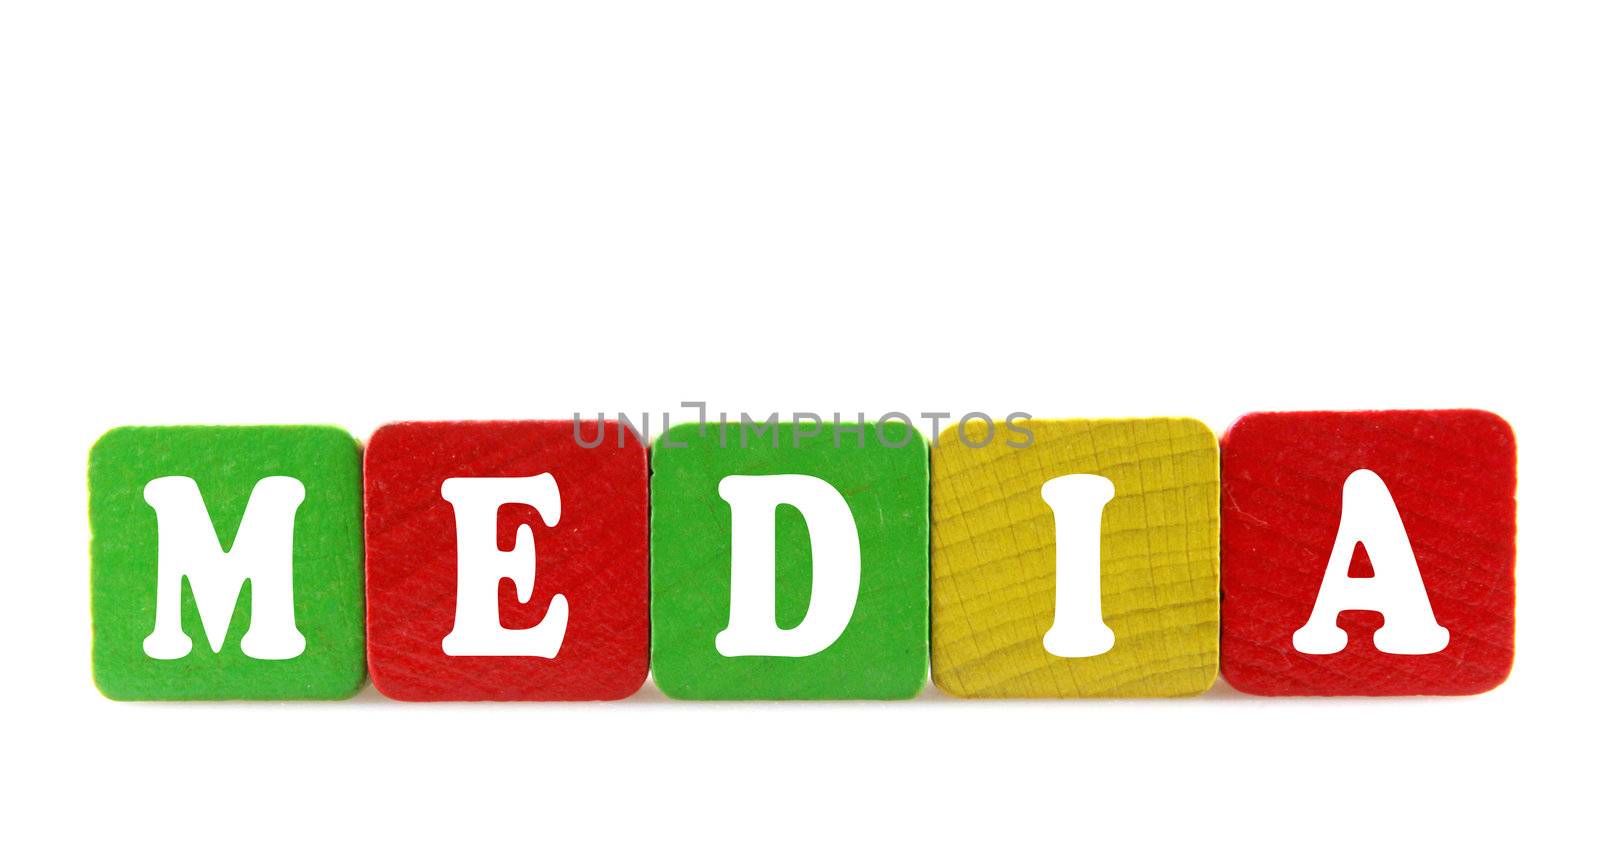 media - isolated text in wooden building blocks